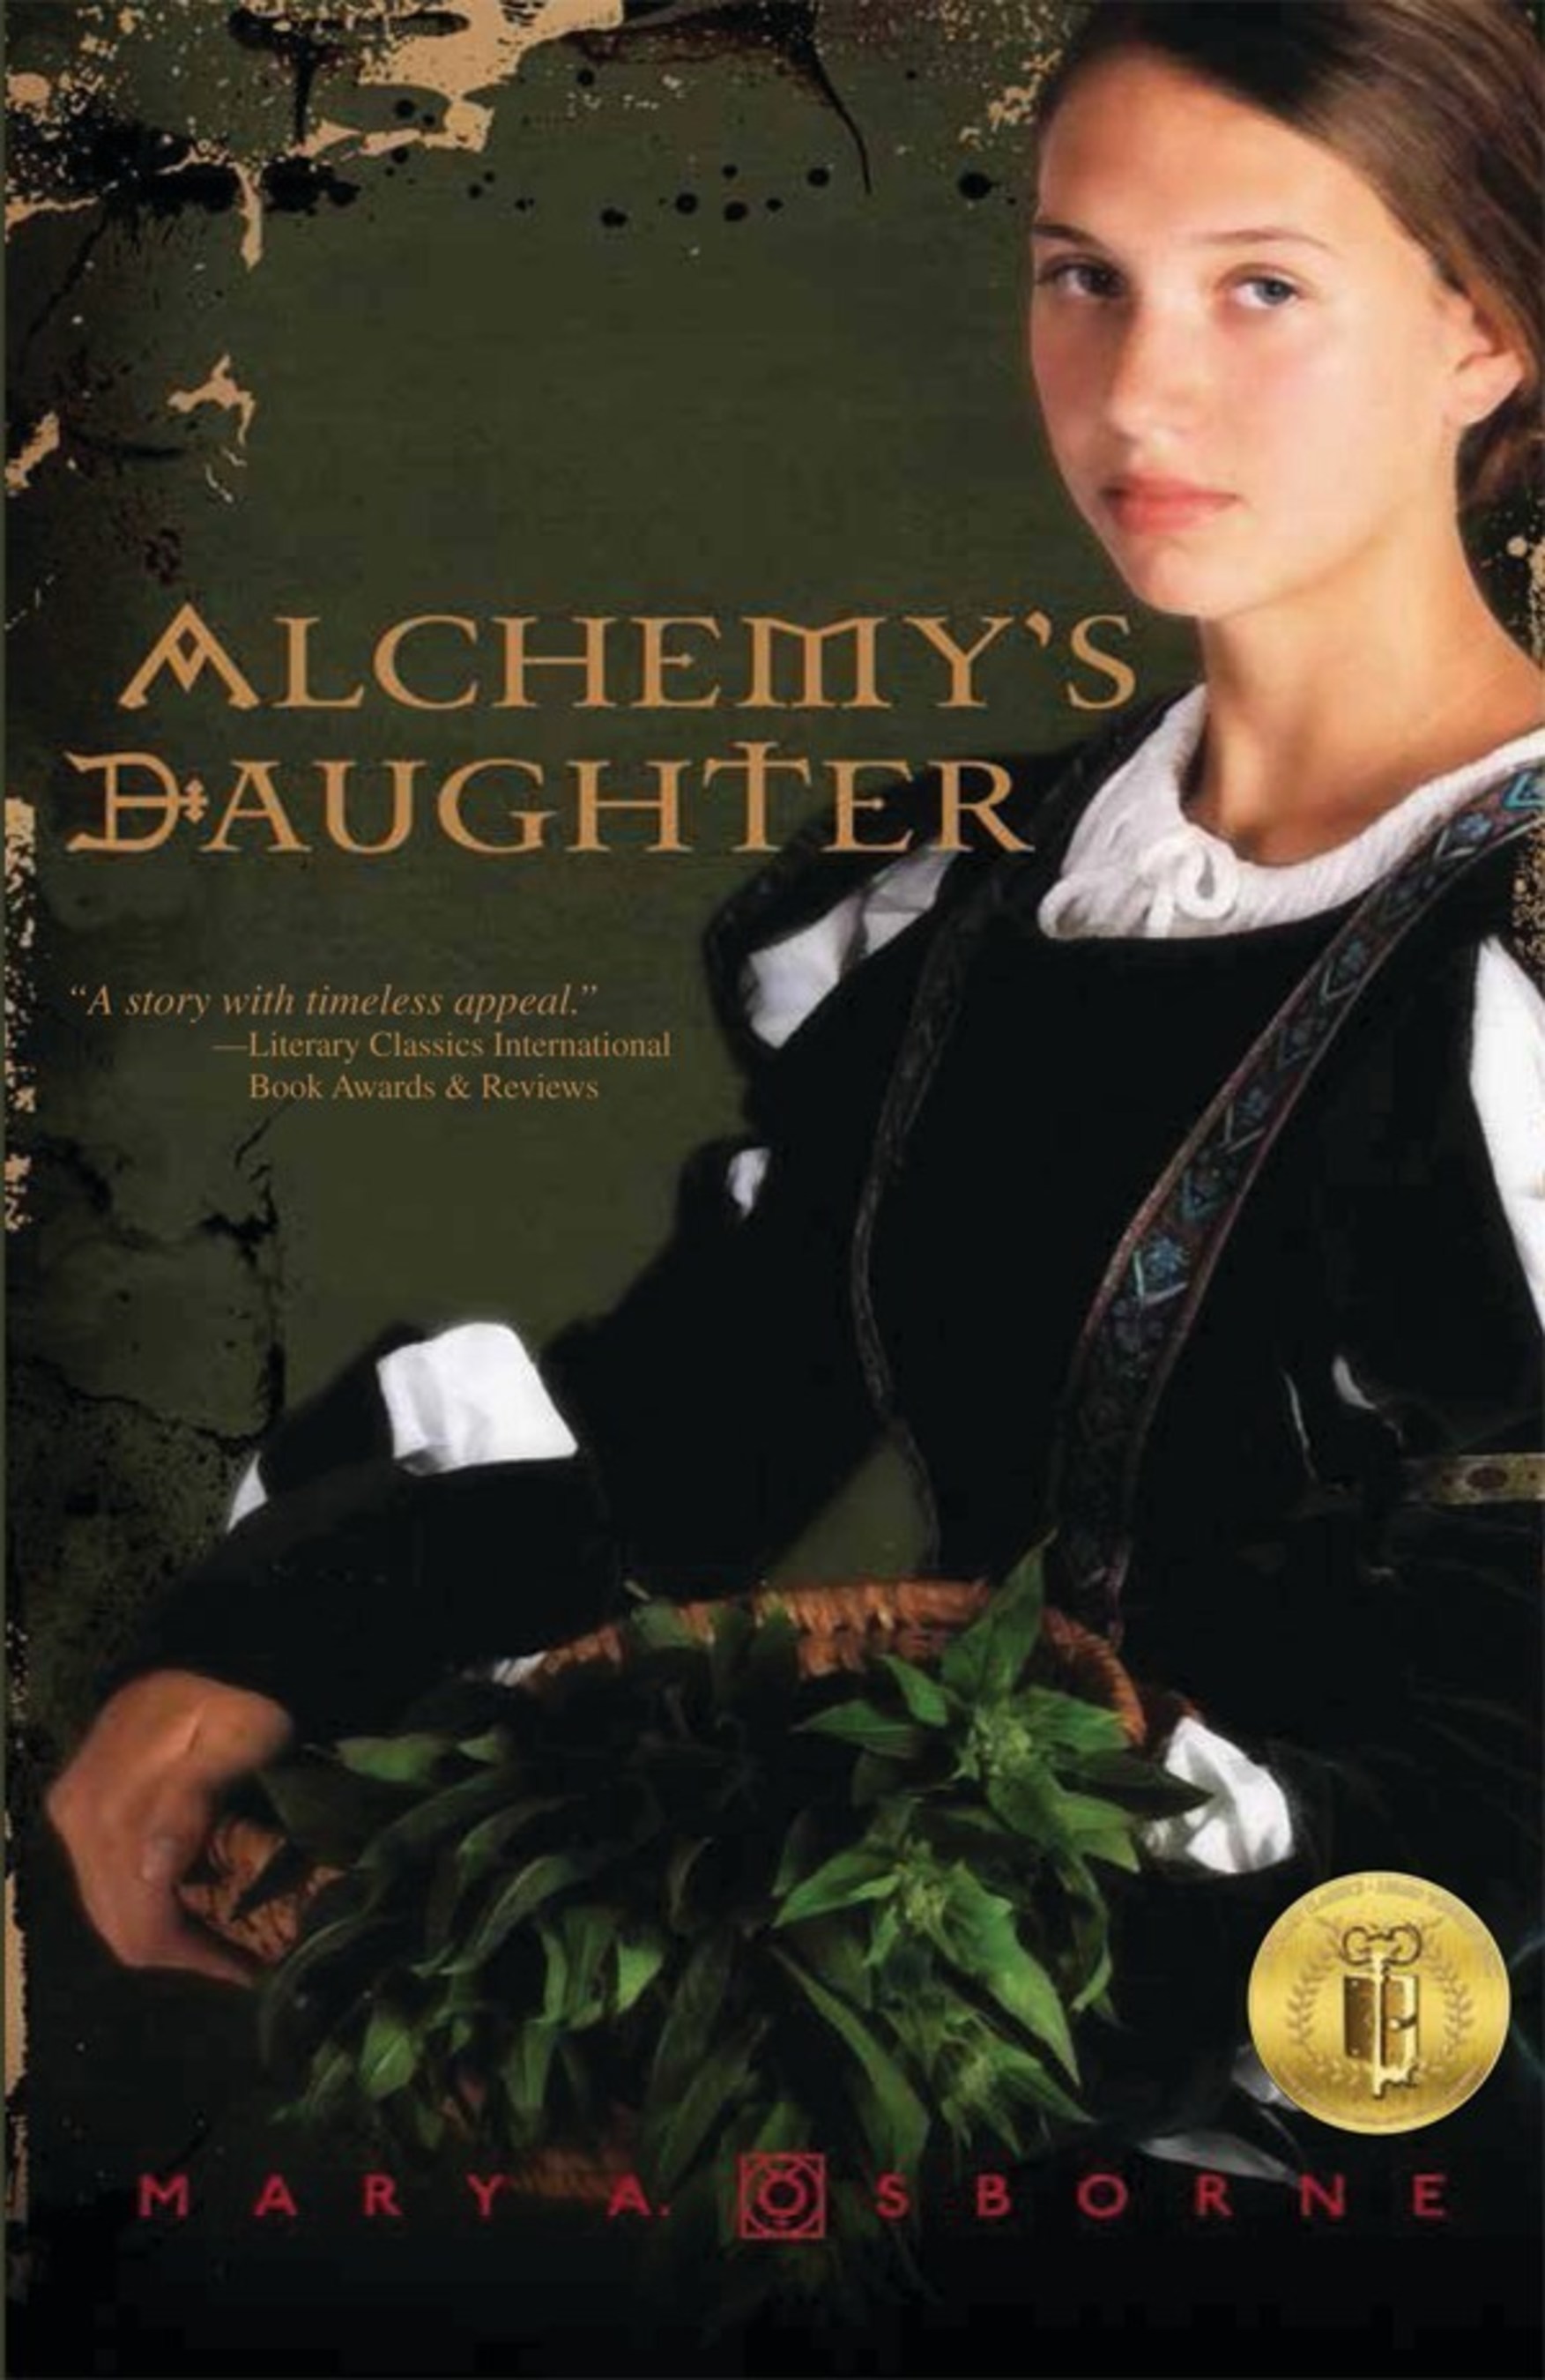 "Brimming with details of life in Italy during the plague of 1348"--Kirkus Reviews on Alchemy's Daughter by Mary A. Osborne, launching at the Zhou B Art Center in Chicago on April 17, 2015. RN's medieval tale forewarns of future pandemic.